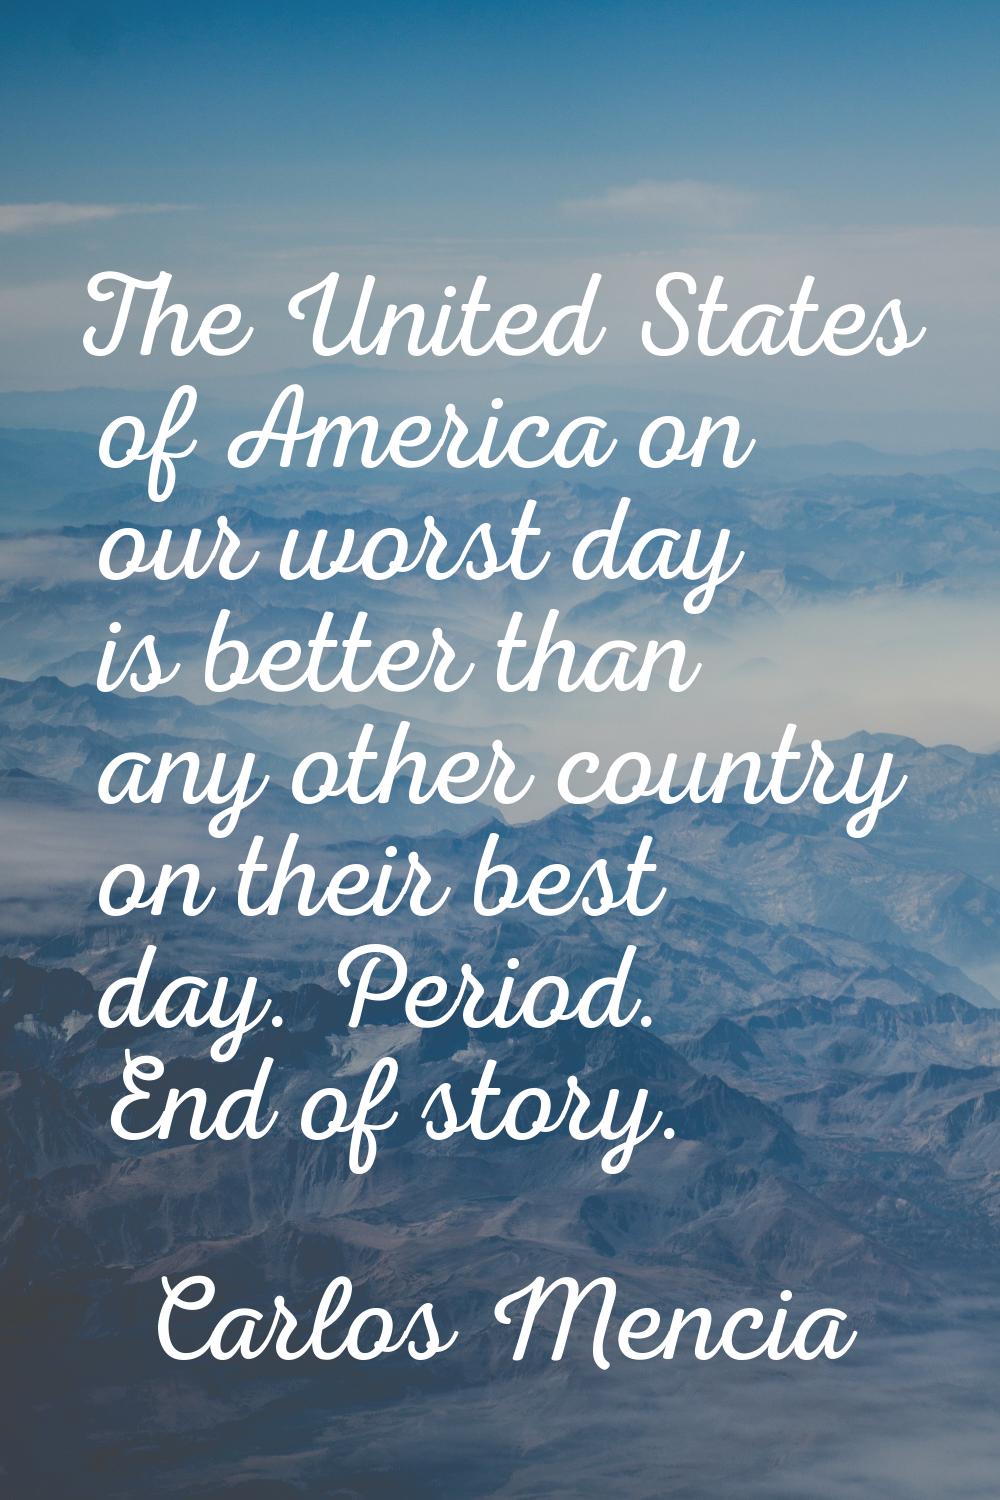 The United States of America on our worst day is better than any other country on their best day. P